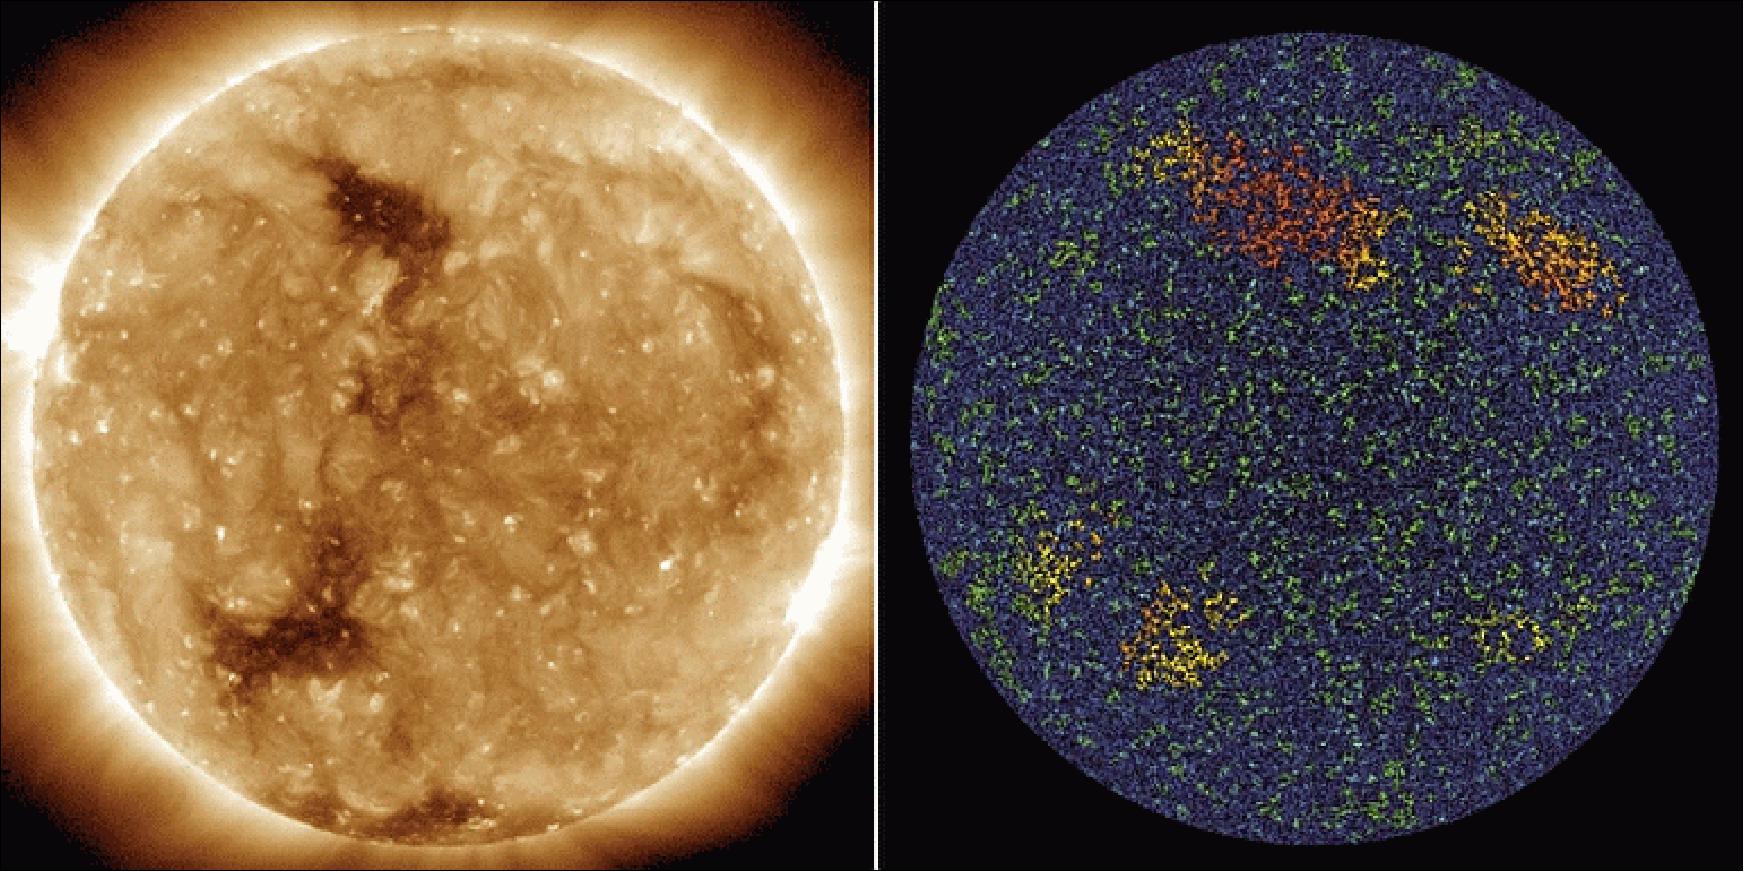 Figure 23: Brightpoints in the sun's atmosphere, left, correspond to magnetic parcels on the sun's surface, seen in the processed data on the right. Green spots show smaller parcels, red and yellow much bigger ones. Images based on data from NASA's SDO captured at 15:00 GMT on May 15, 2010 (image credit: NASA)